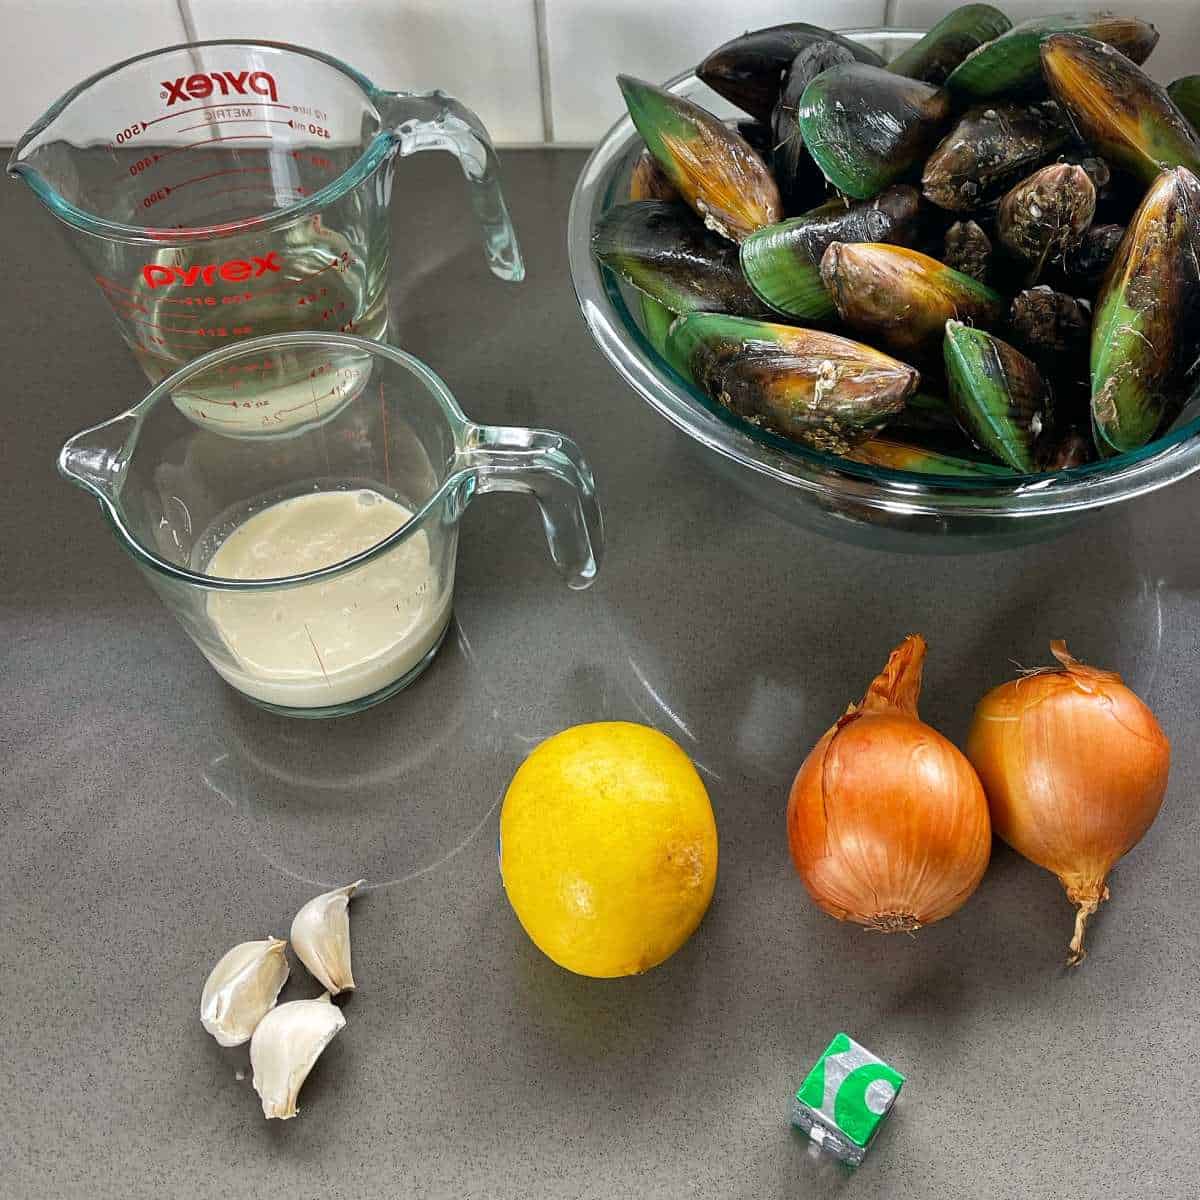 The ingredients for steamed mussels in white wine and cream sauce on a grey bench top.